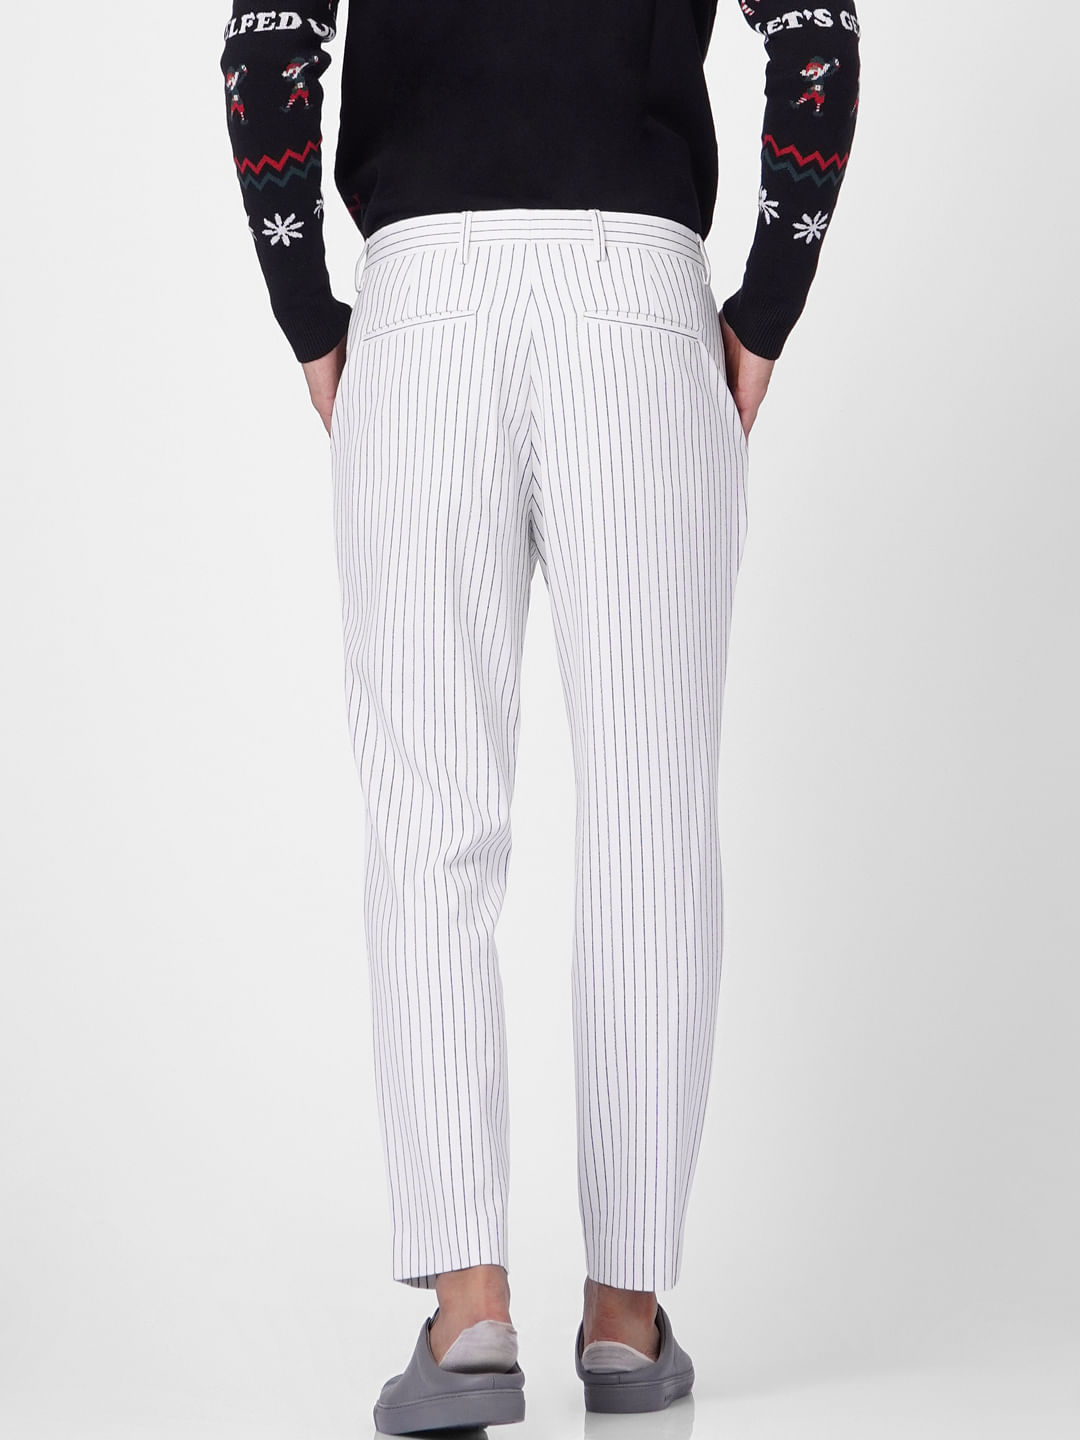 Tailored  Formal trousers Paul Smith  Checkpattern tailored trousers   W1R269TJ0181169